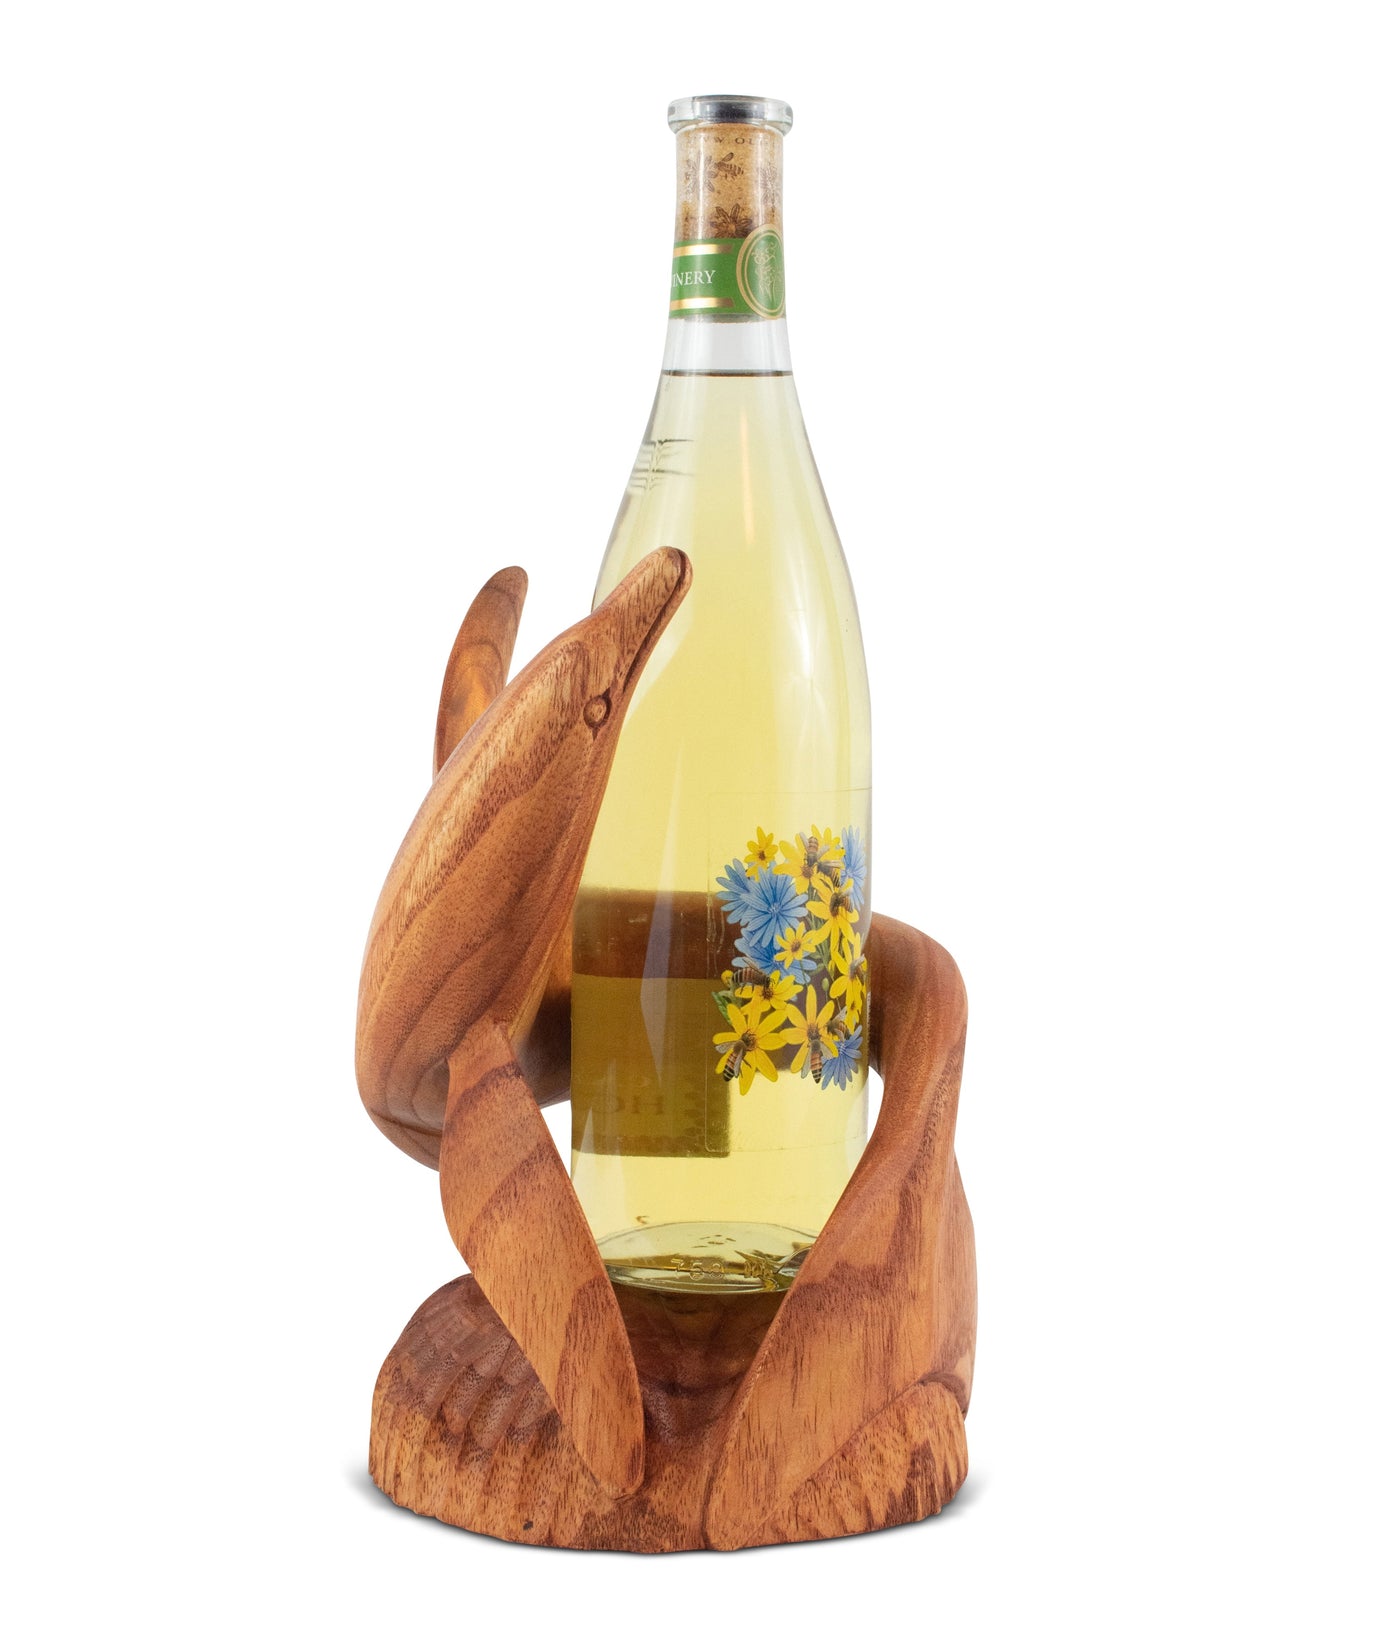 Wooden Handmade Wine Rack Bottle Holder Free Standing Dolphin Fish Wood Rustic Hand Carved Home Decor Accent Decoration Gift Bar Art Handcrafted